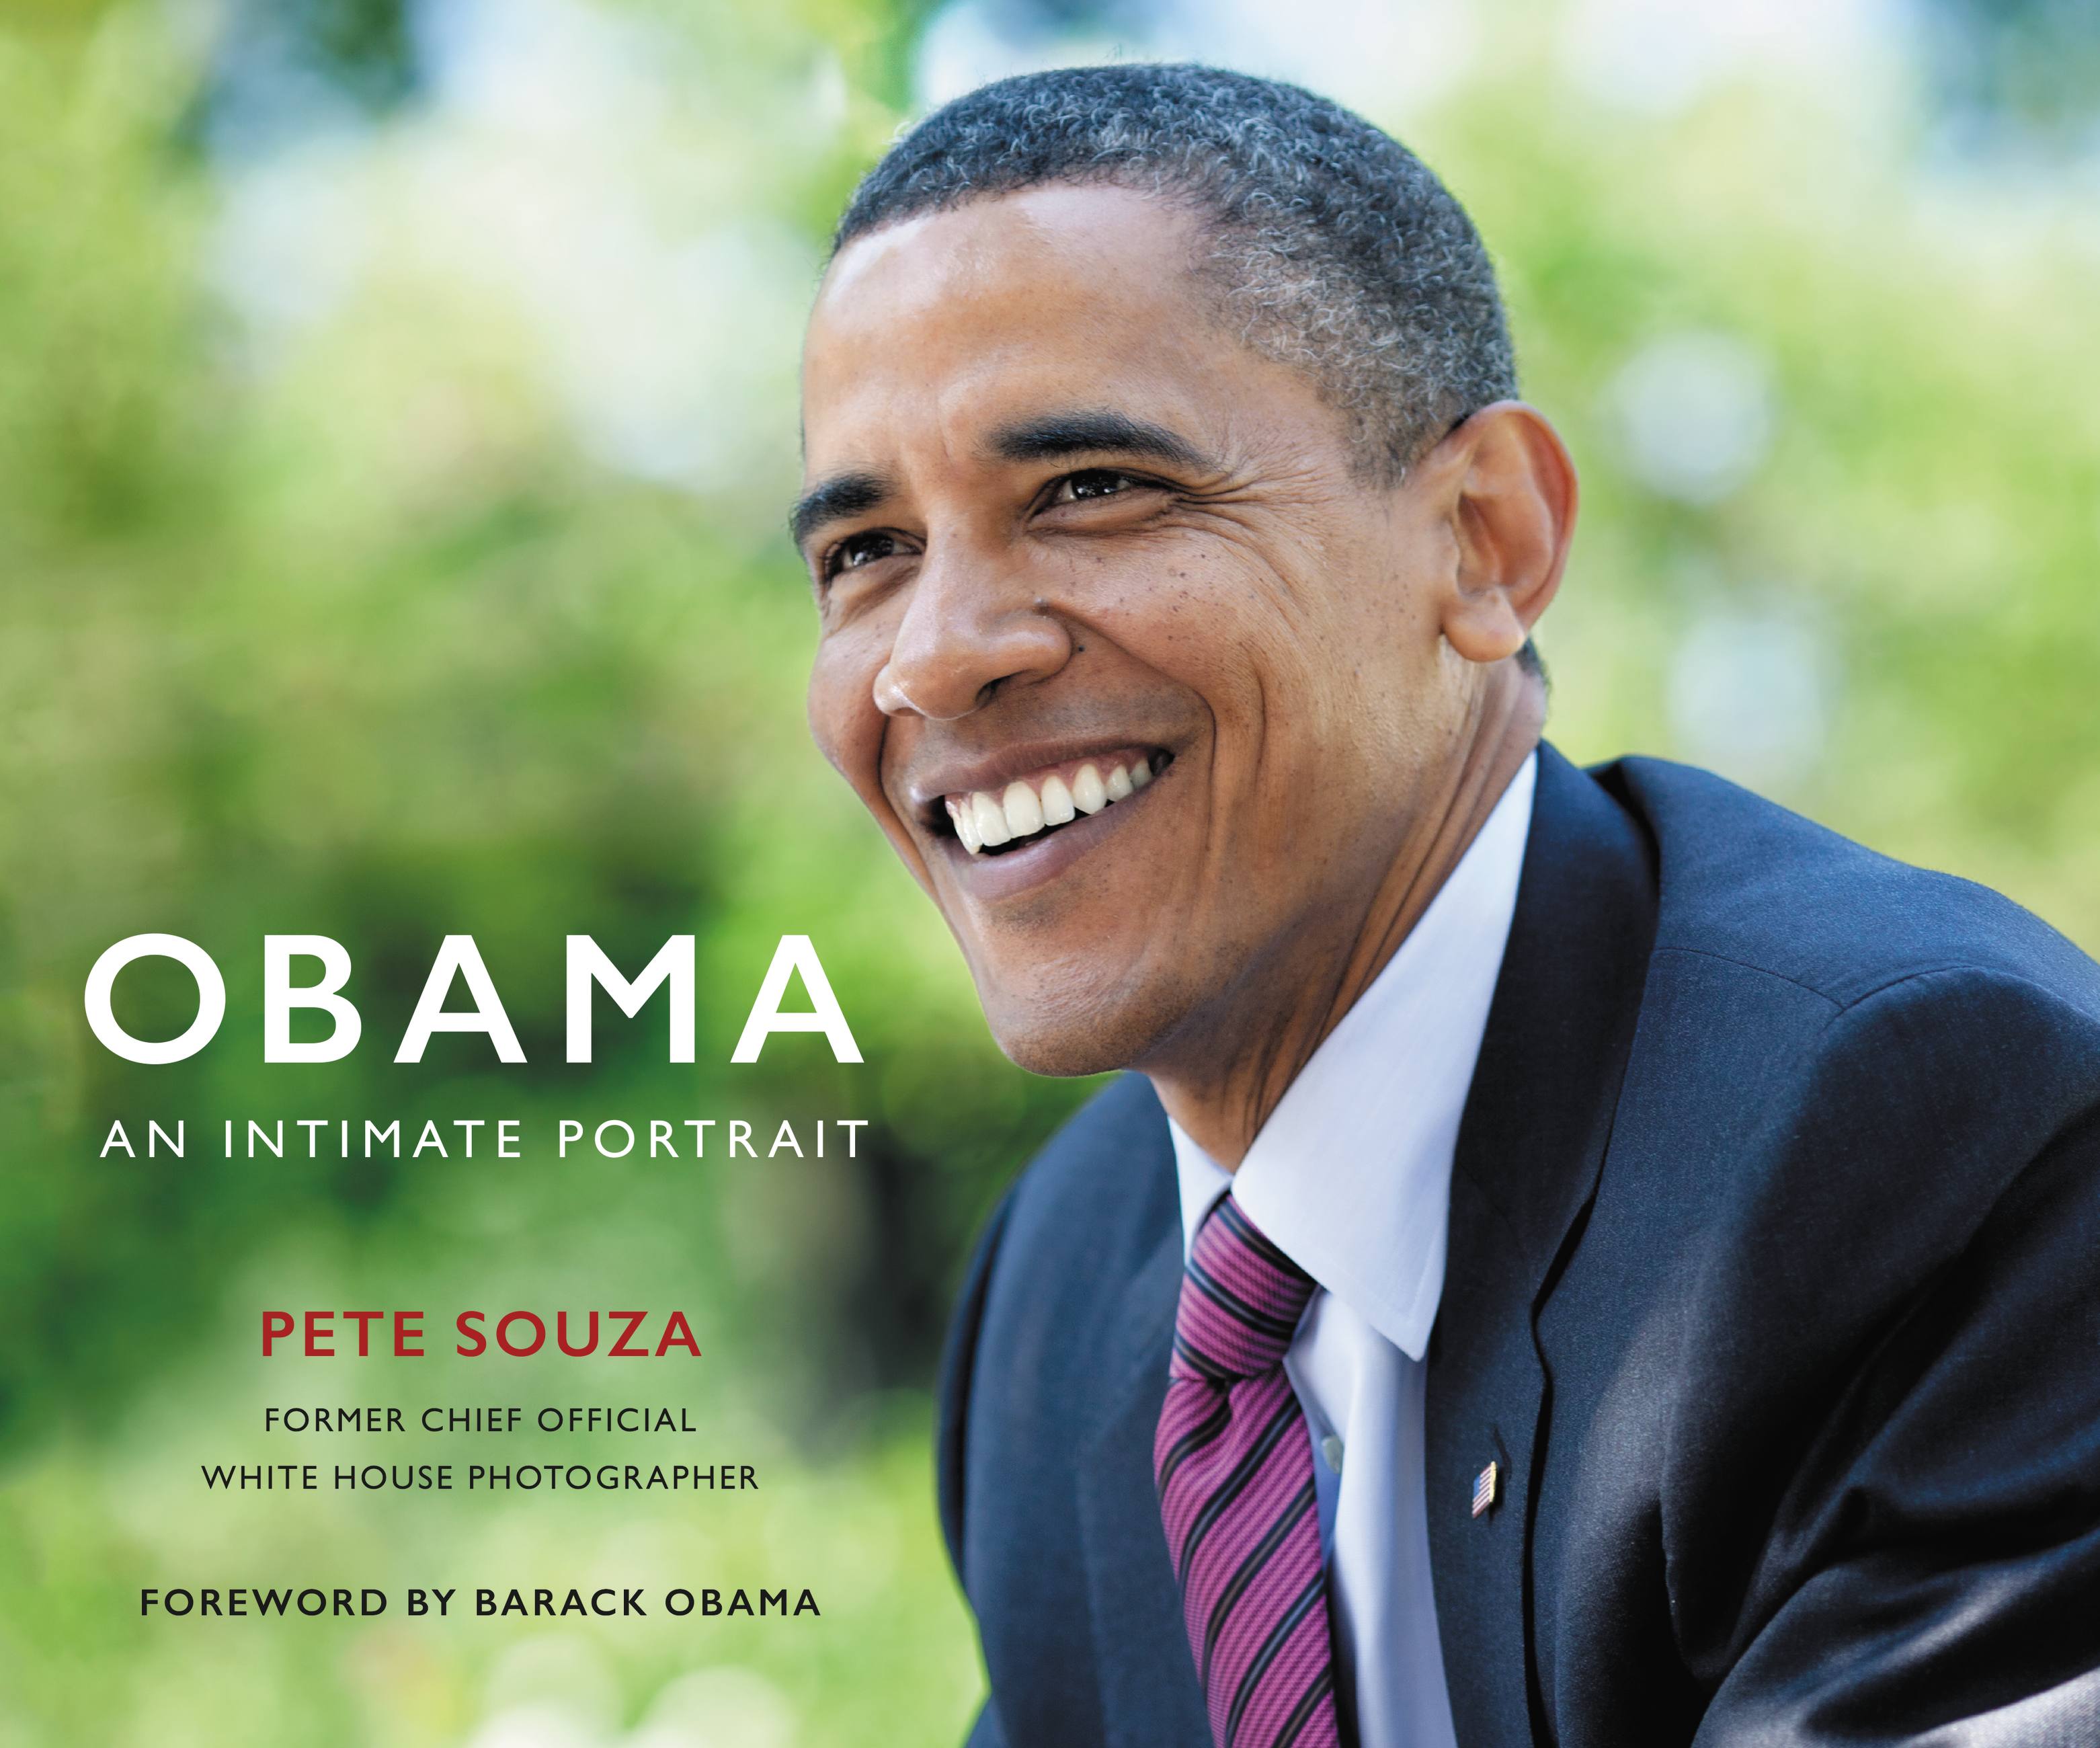 Link to Obama: An Intimate Portrait by Pete Souza in the Catalog